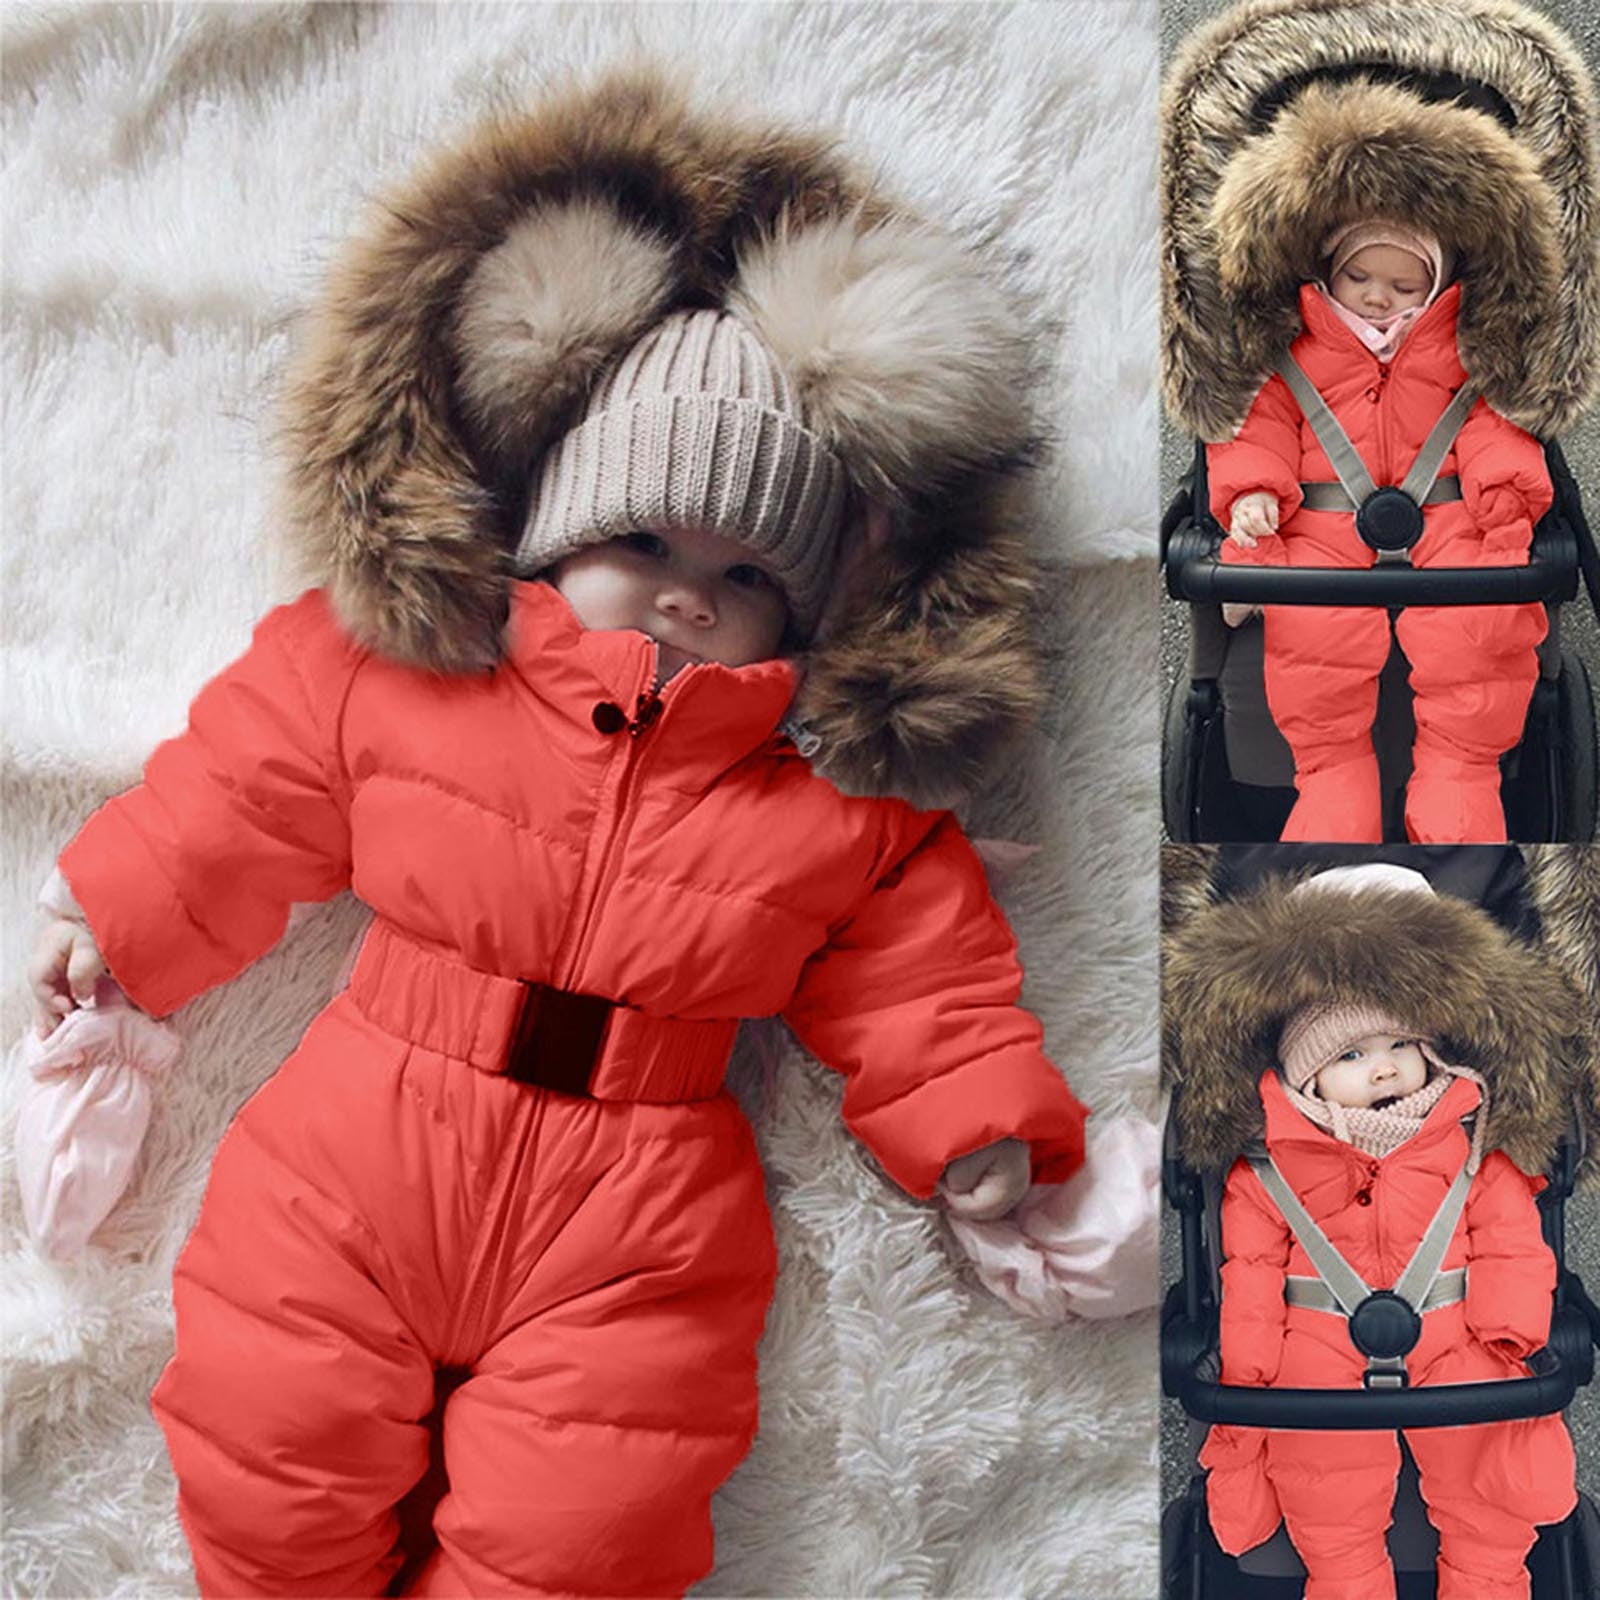 Infant Baby Boy Girl Winter Romper Jacket Hooded Warm Thick Coat Outerwear 